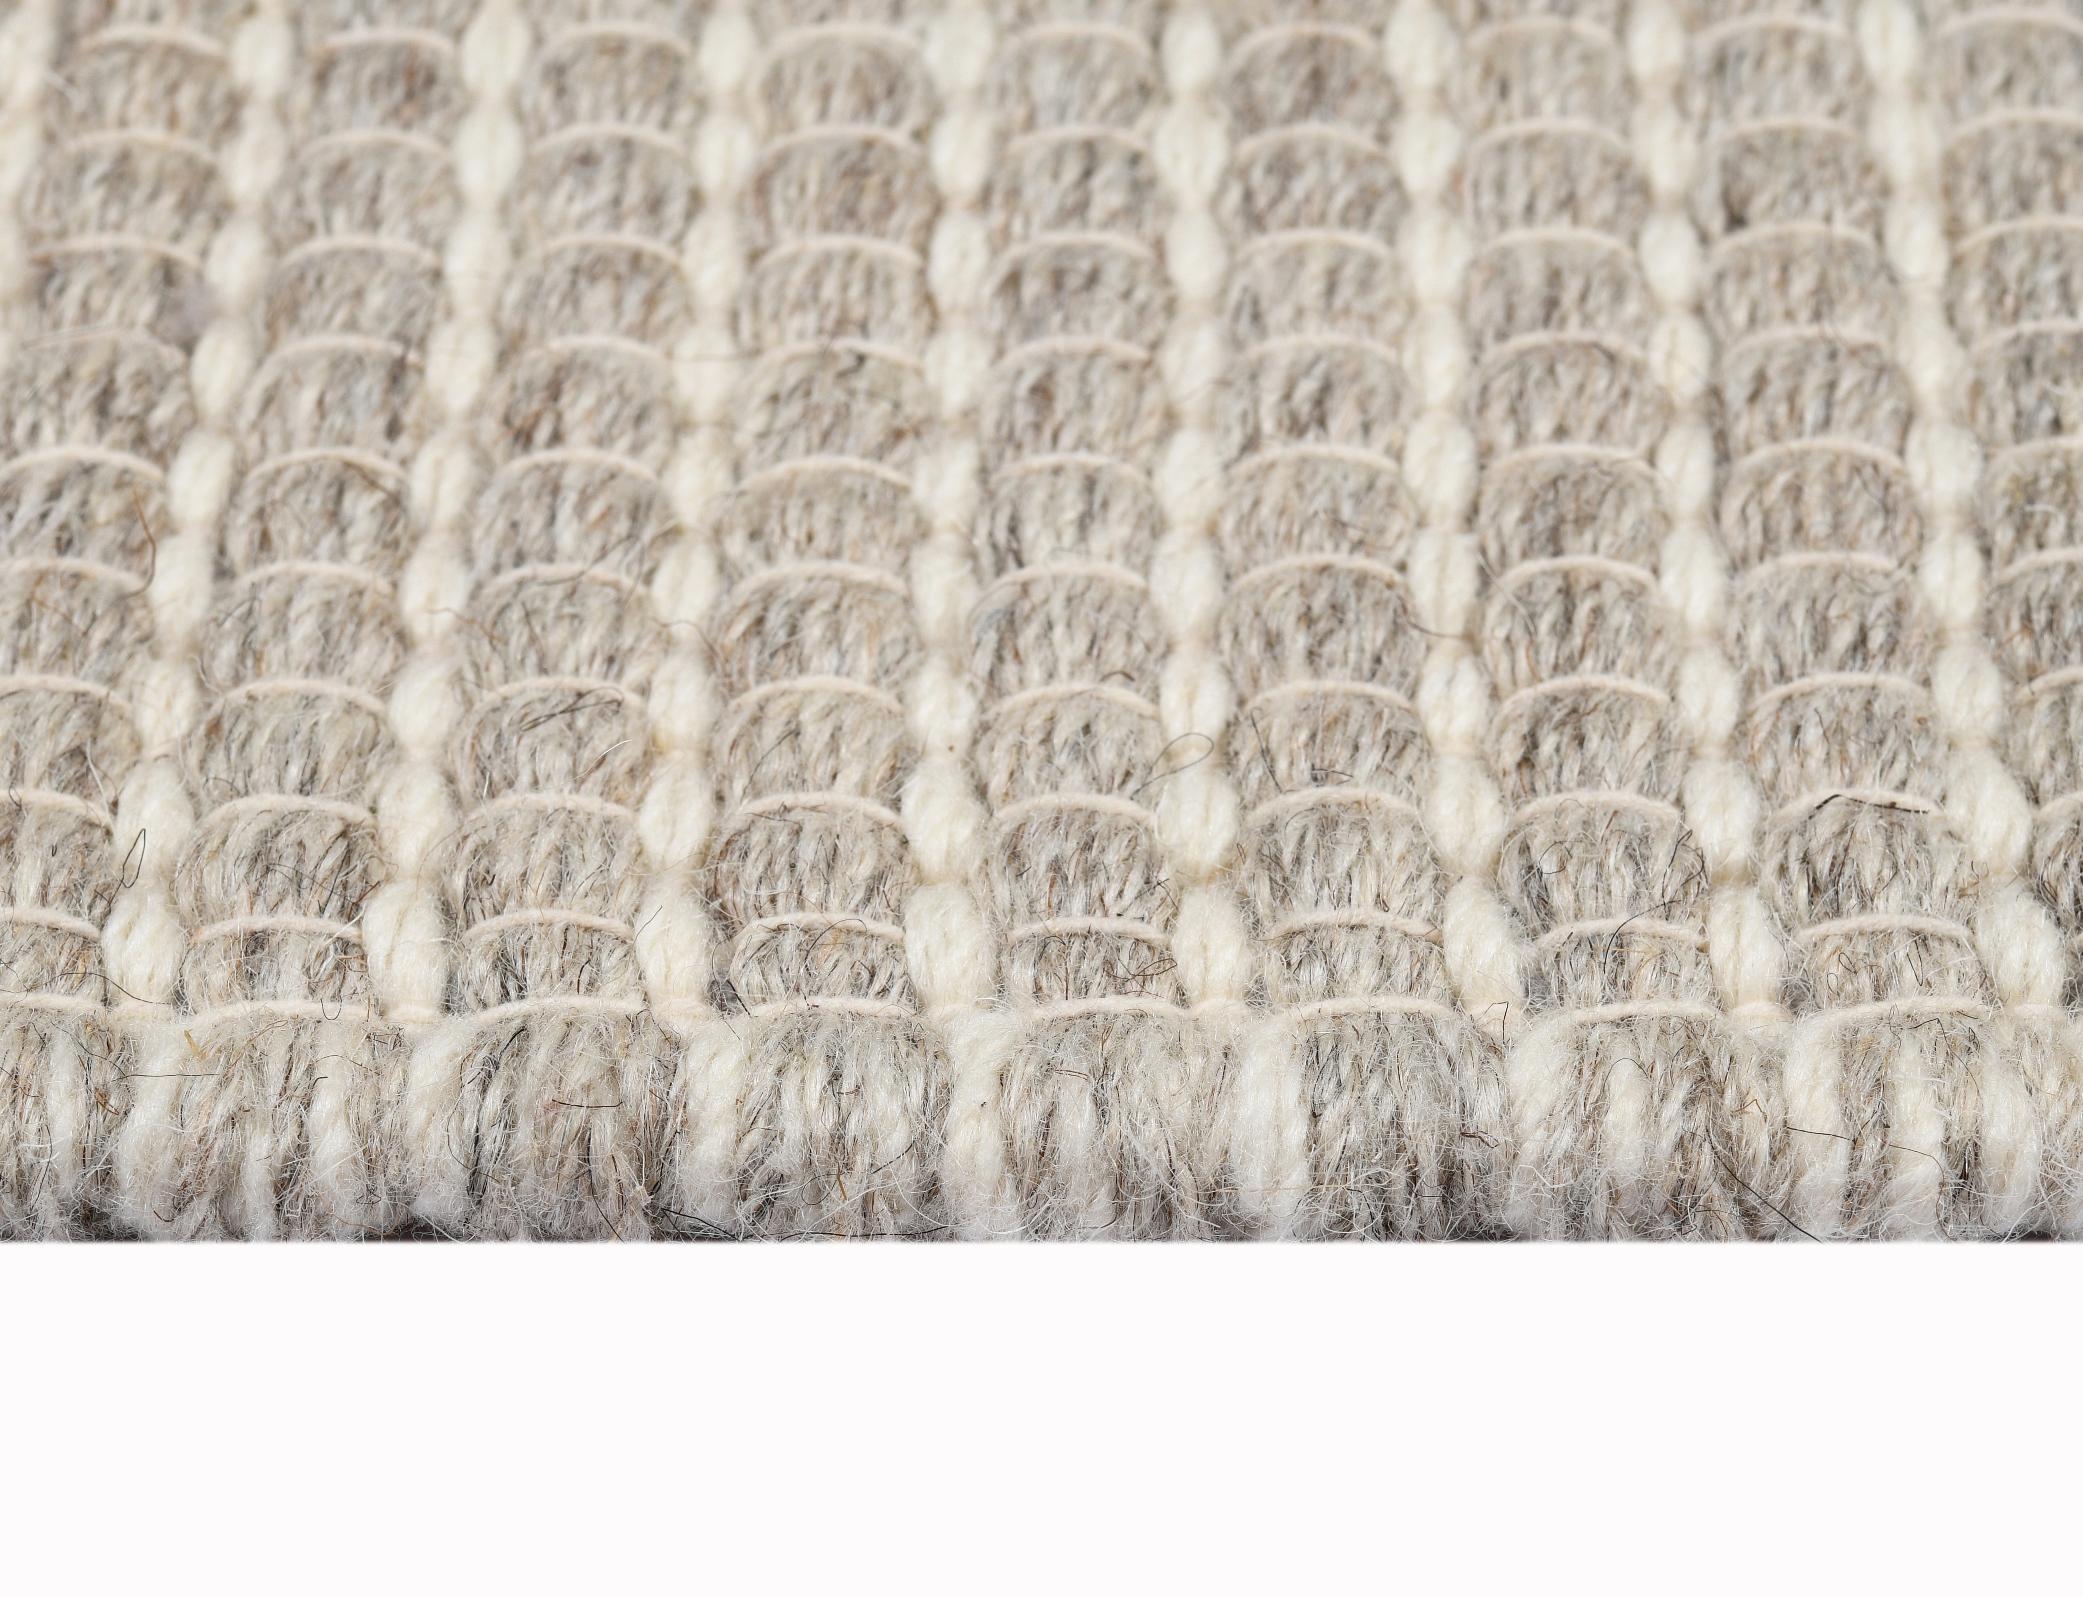 Indian Lex, Ash, Handwoven Face 60% Undyed NZ Wool, 40% Undyed MED Wool, 6' x 9' For Sale